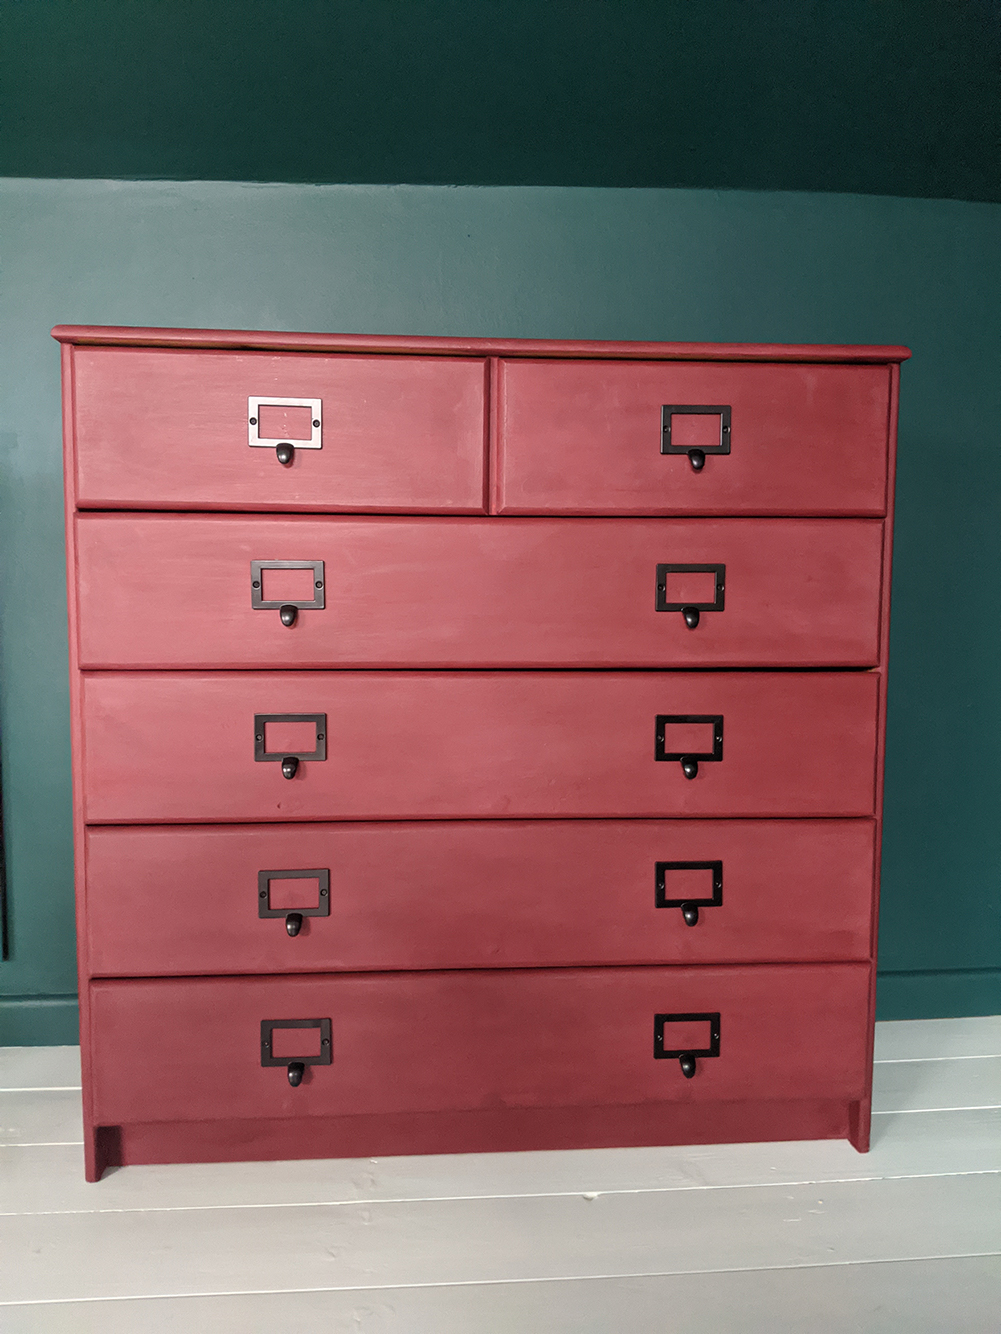 A photo of the finished chest of drawers, with new handles.